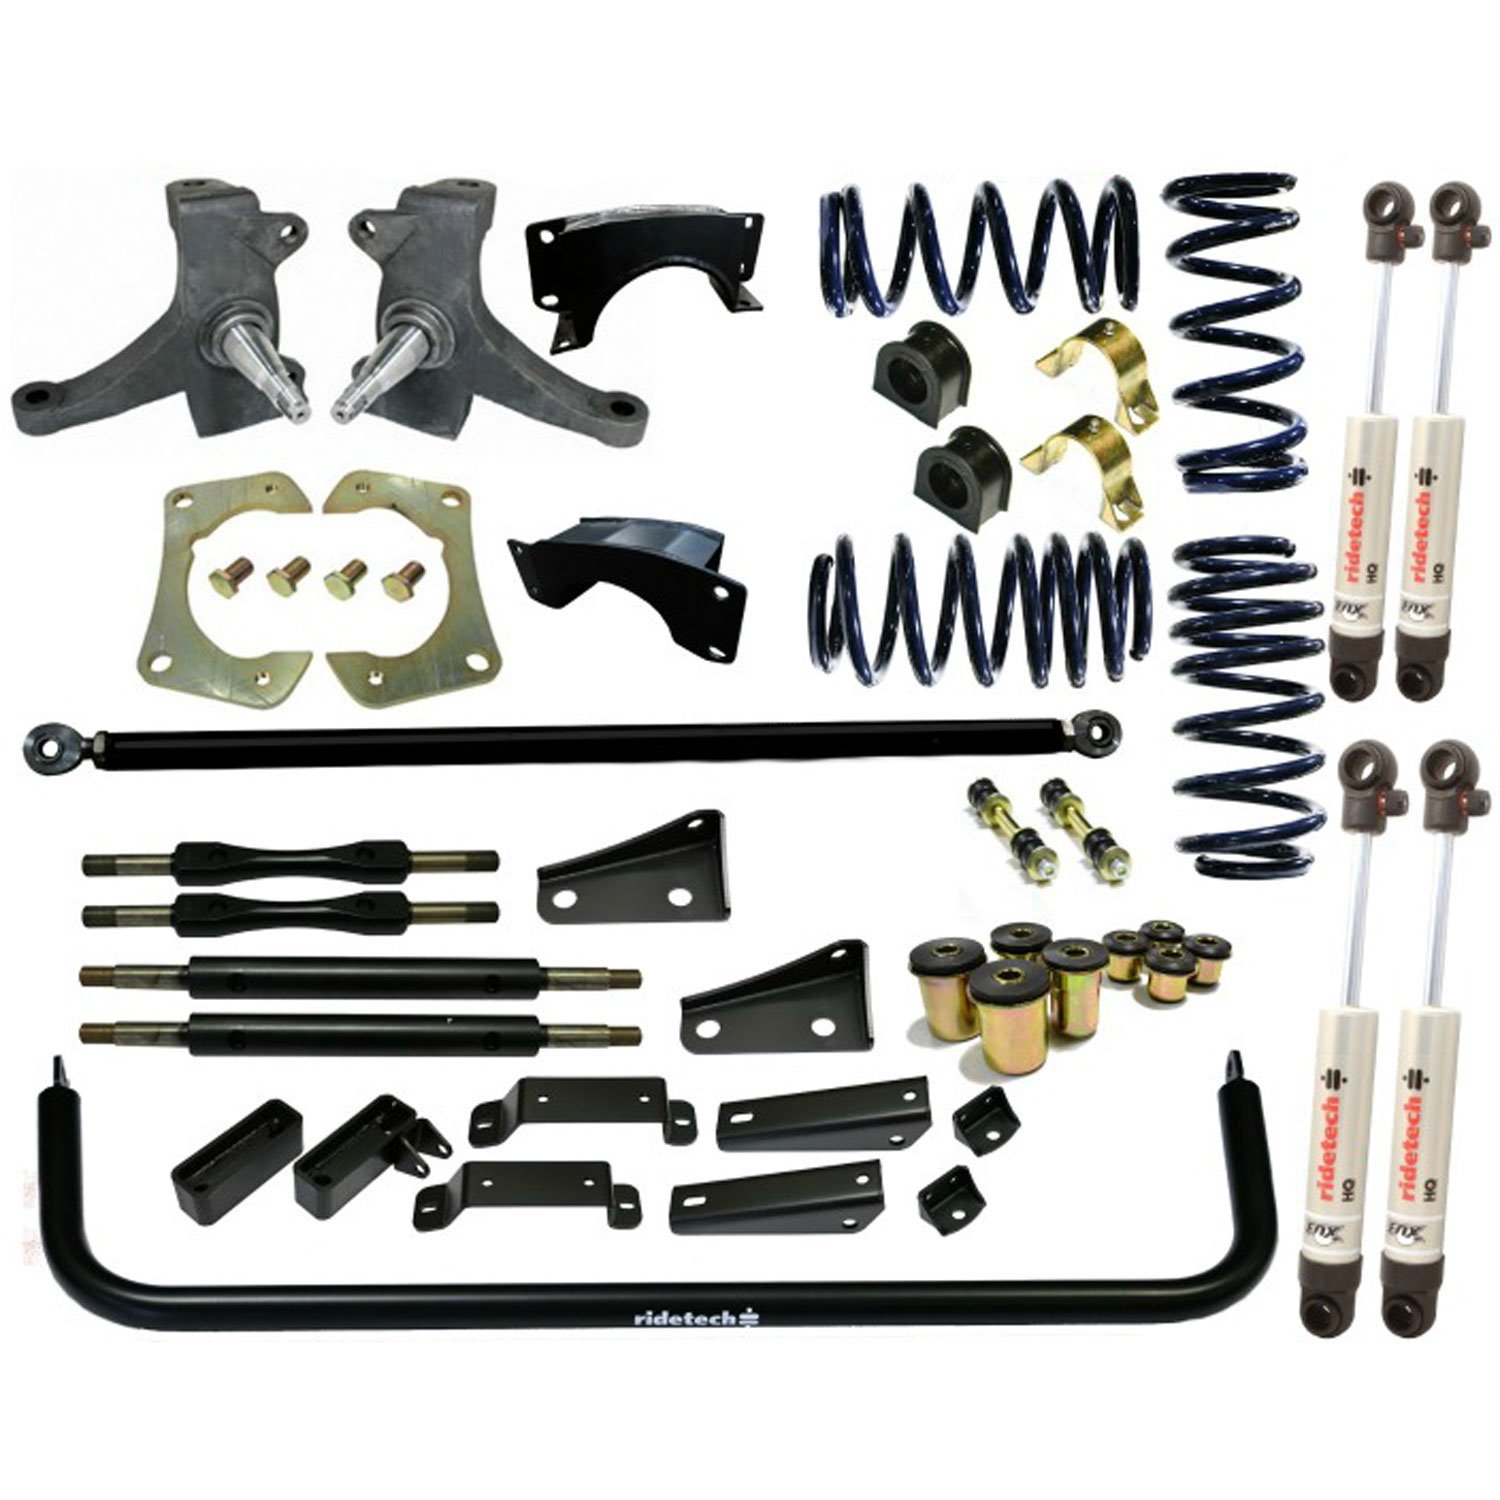 StreetGrip Suspension System for 1963-1970 GM 2WD Trucks w/Small Block, GM LS Engines (Includes Control Arm Bushing Kit)